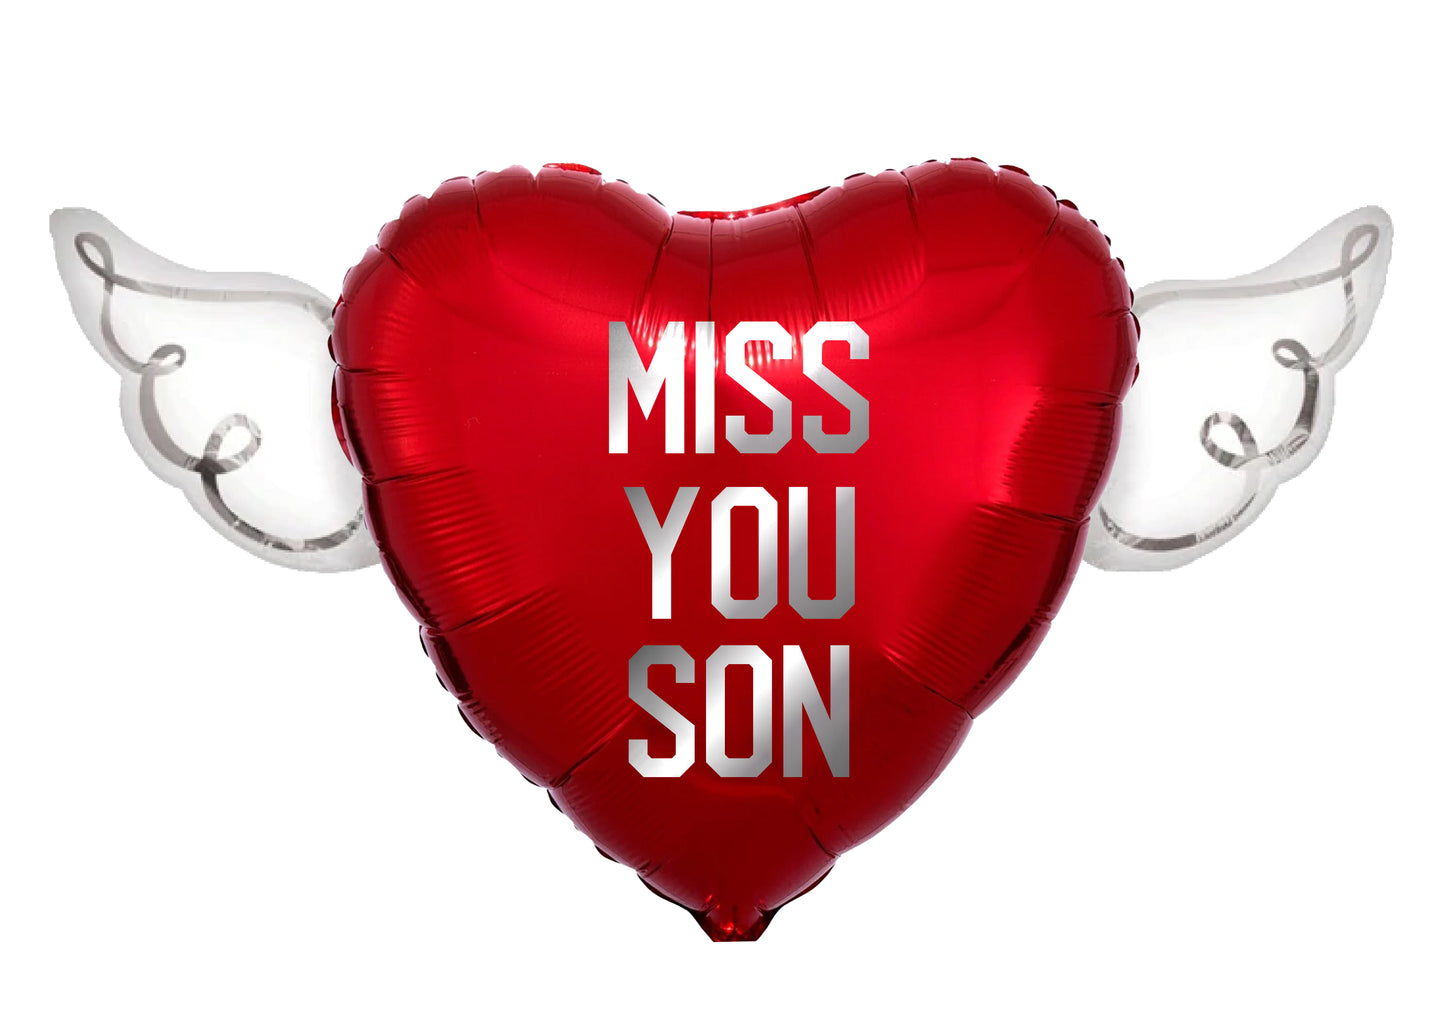 Miss You Son Heavenly Balloons Heart Shaped with angel wings (Red)